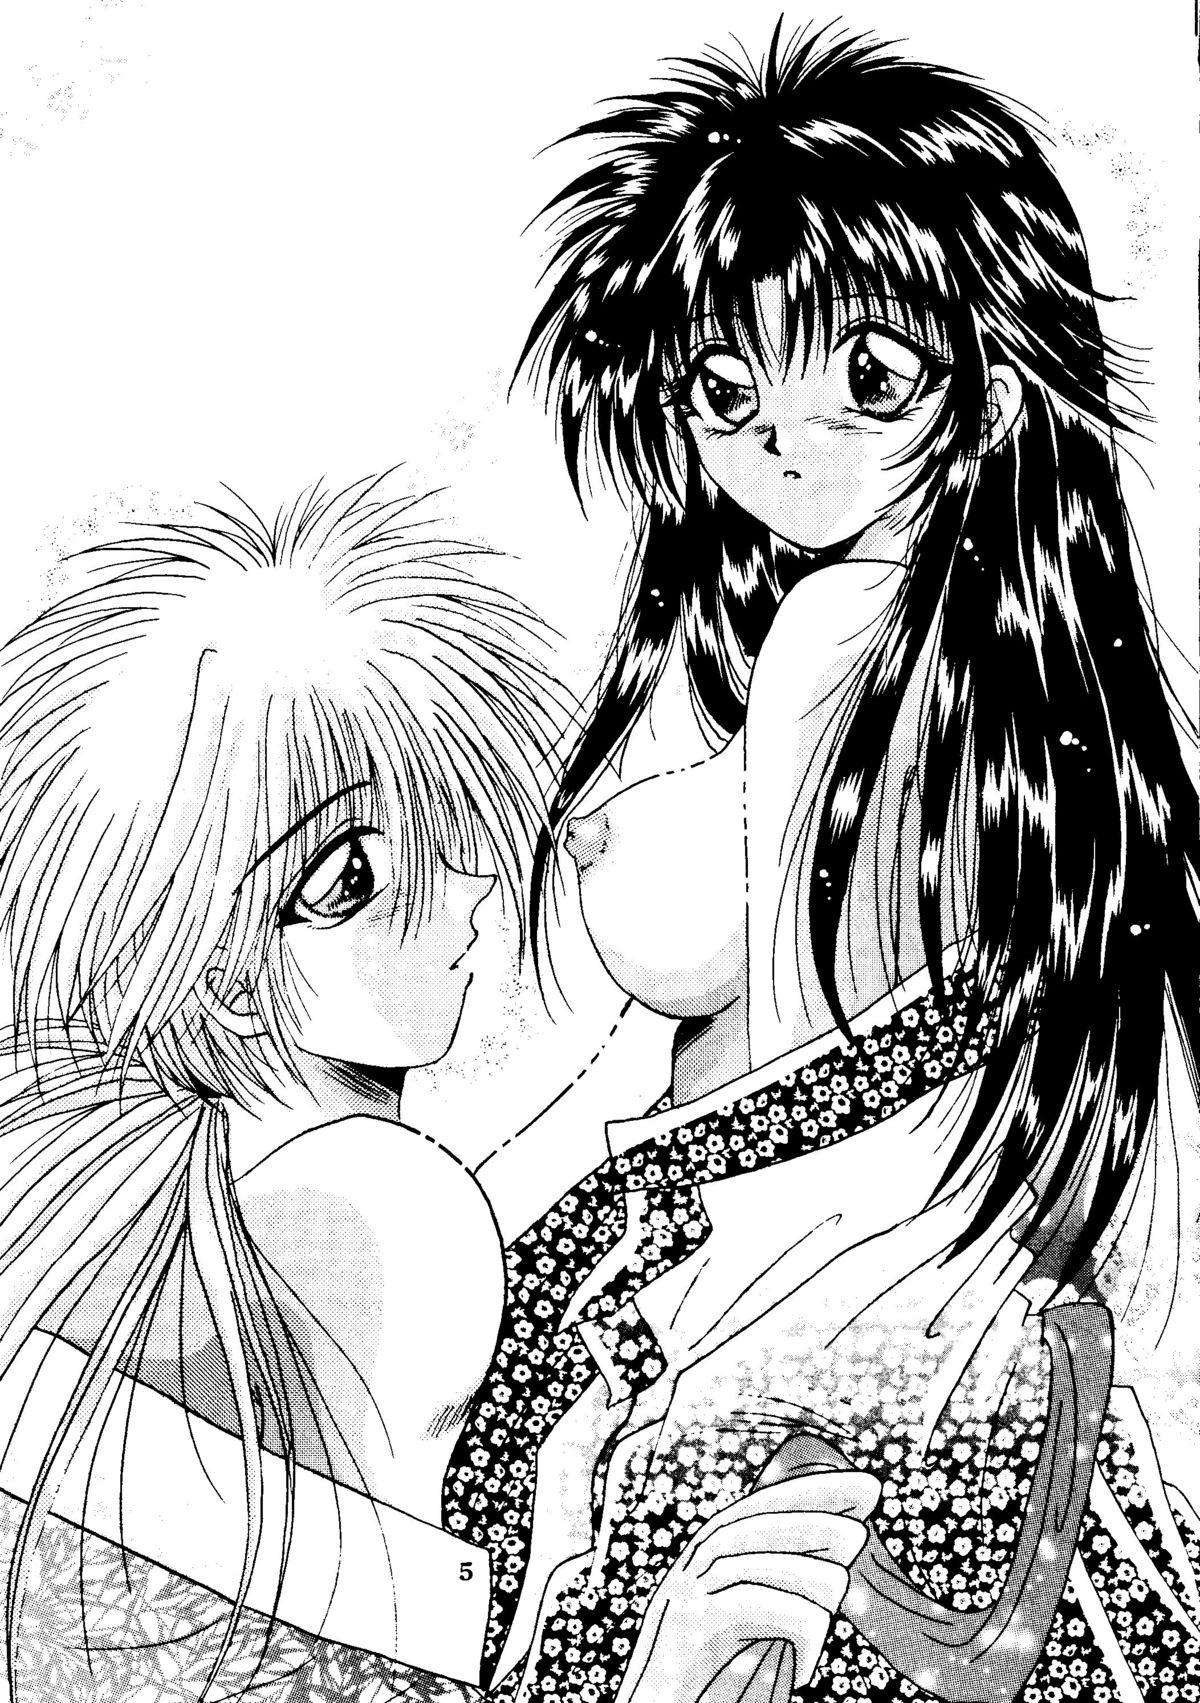 Cameltoe I Believe... - Rurouni kenshin Submission - Page 4